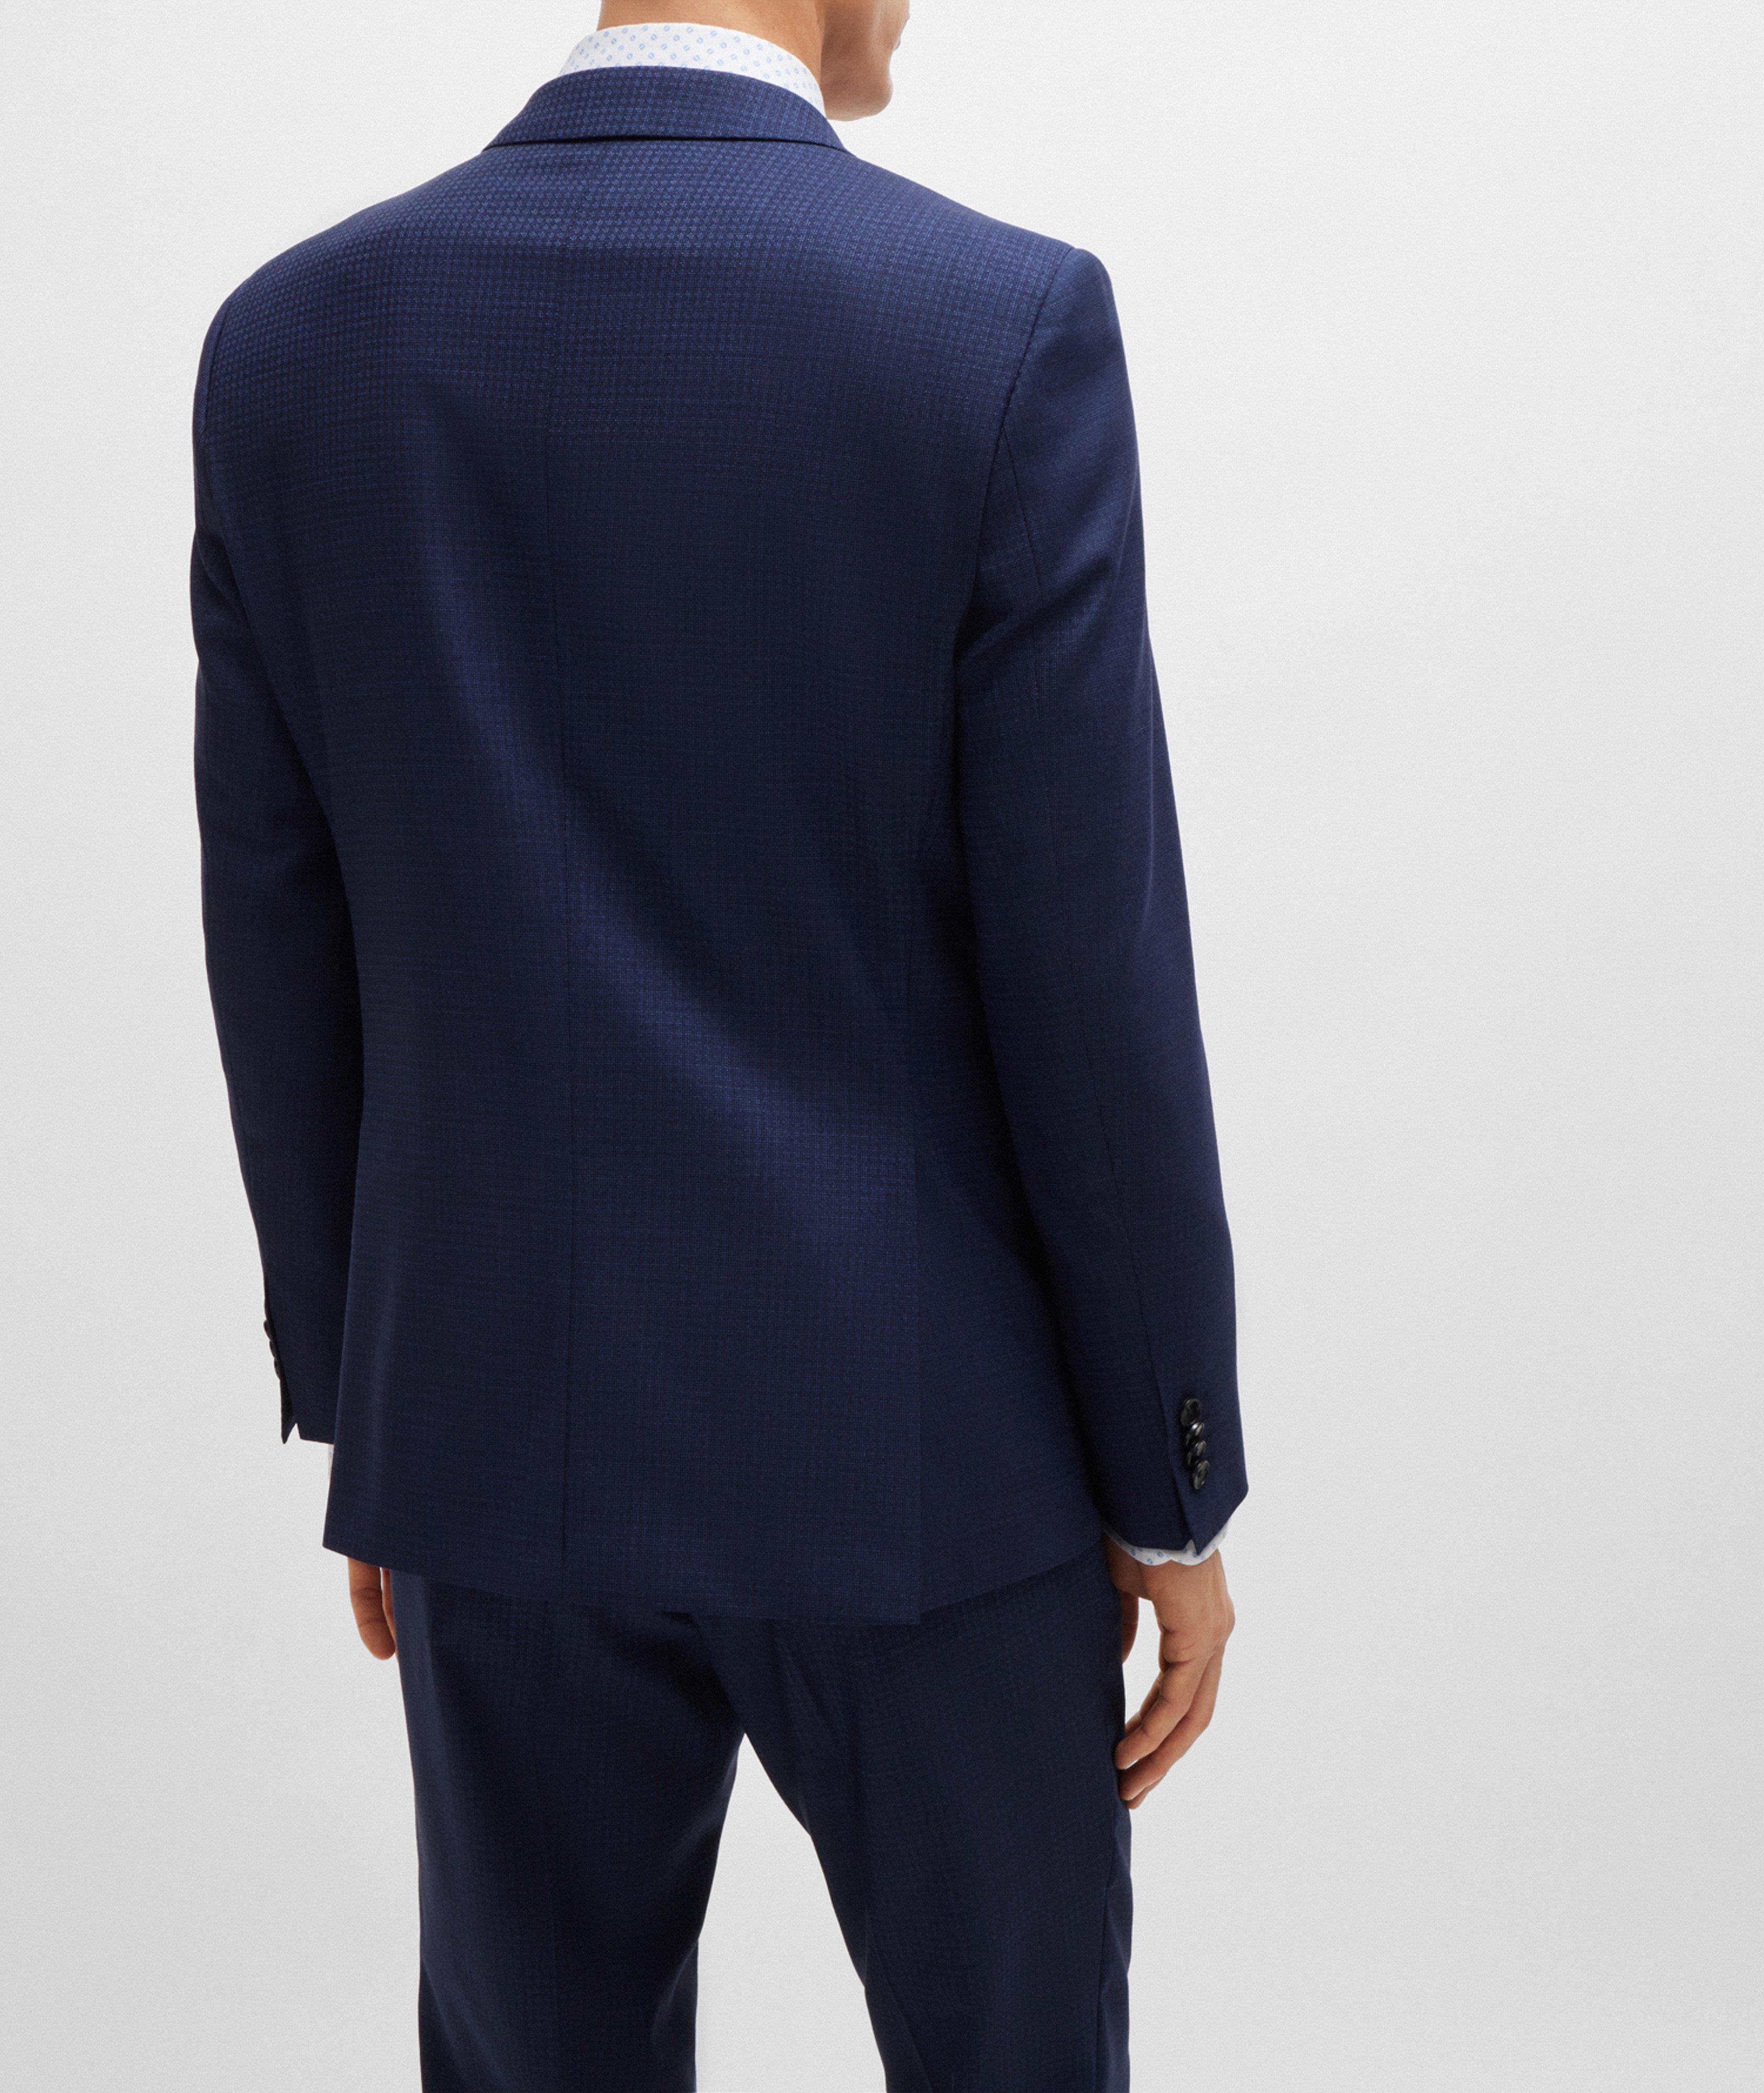 Checked Slim-Fit Suit image 2